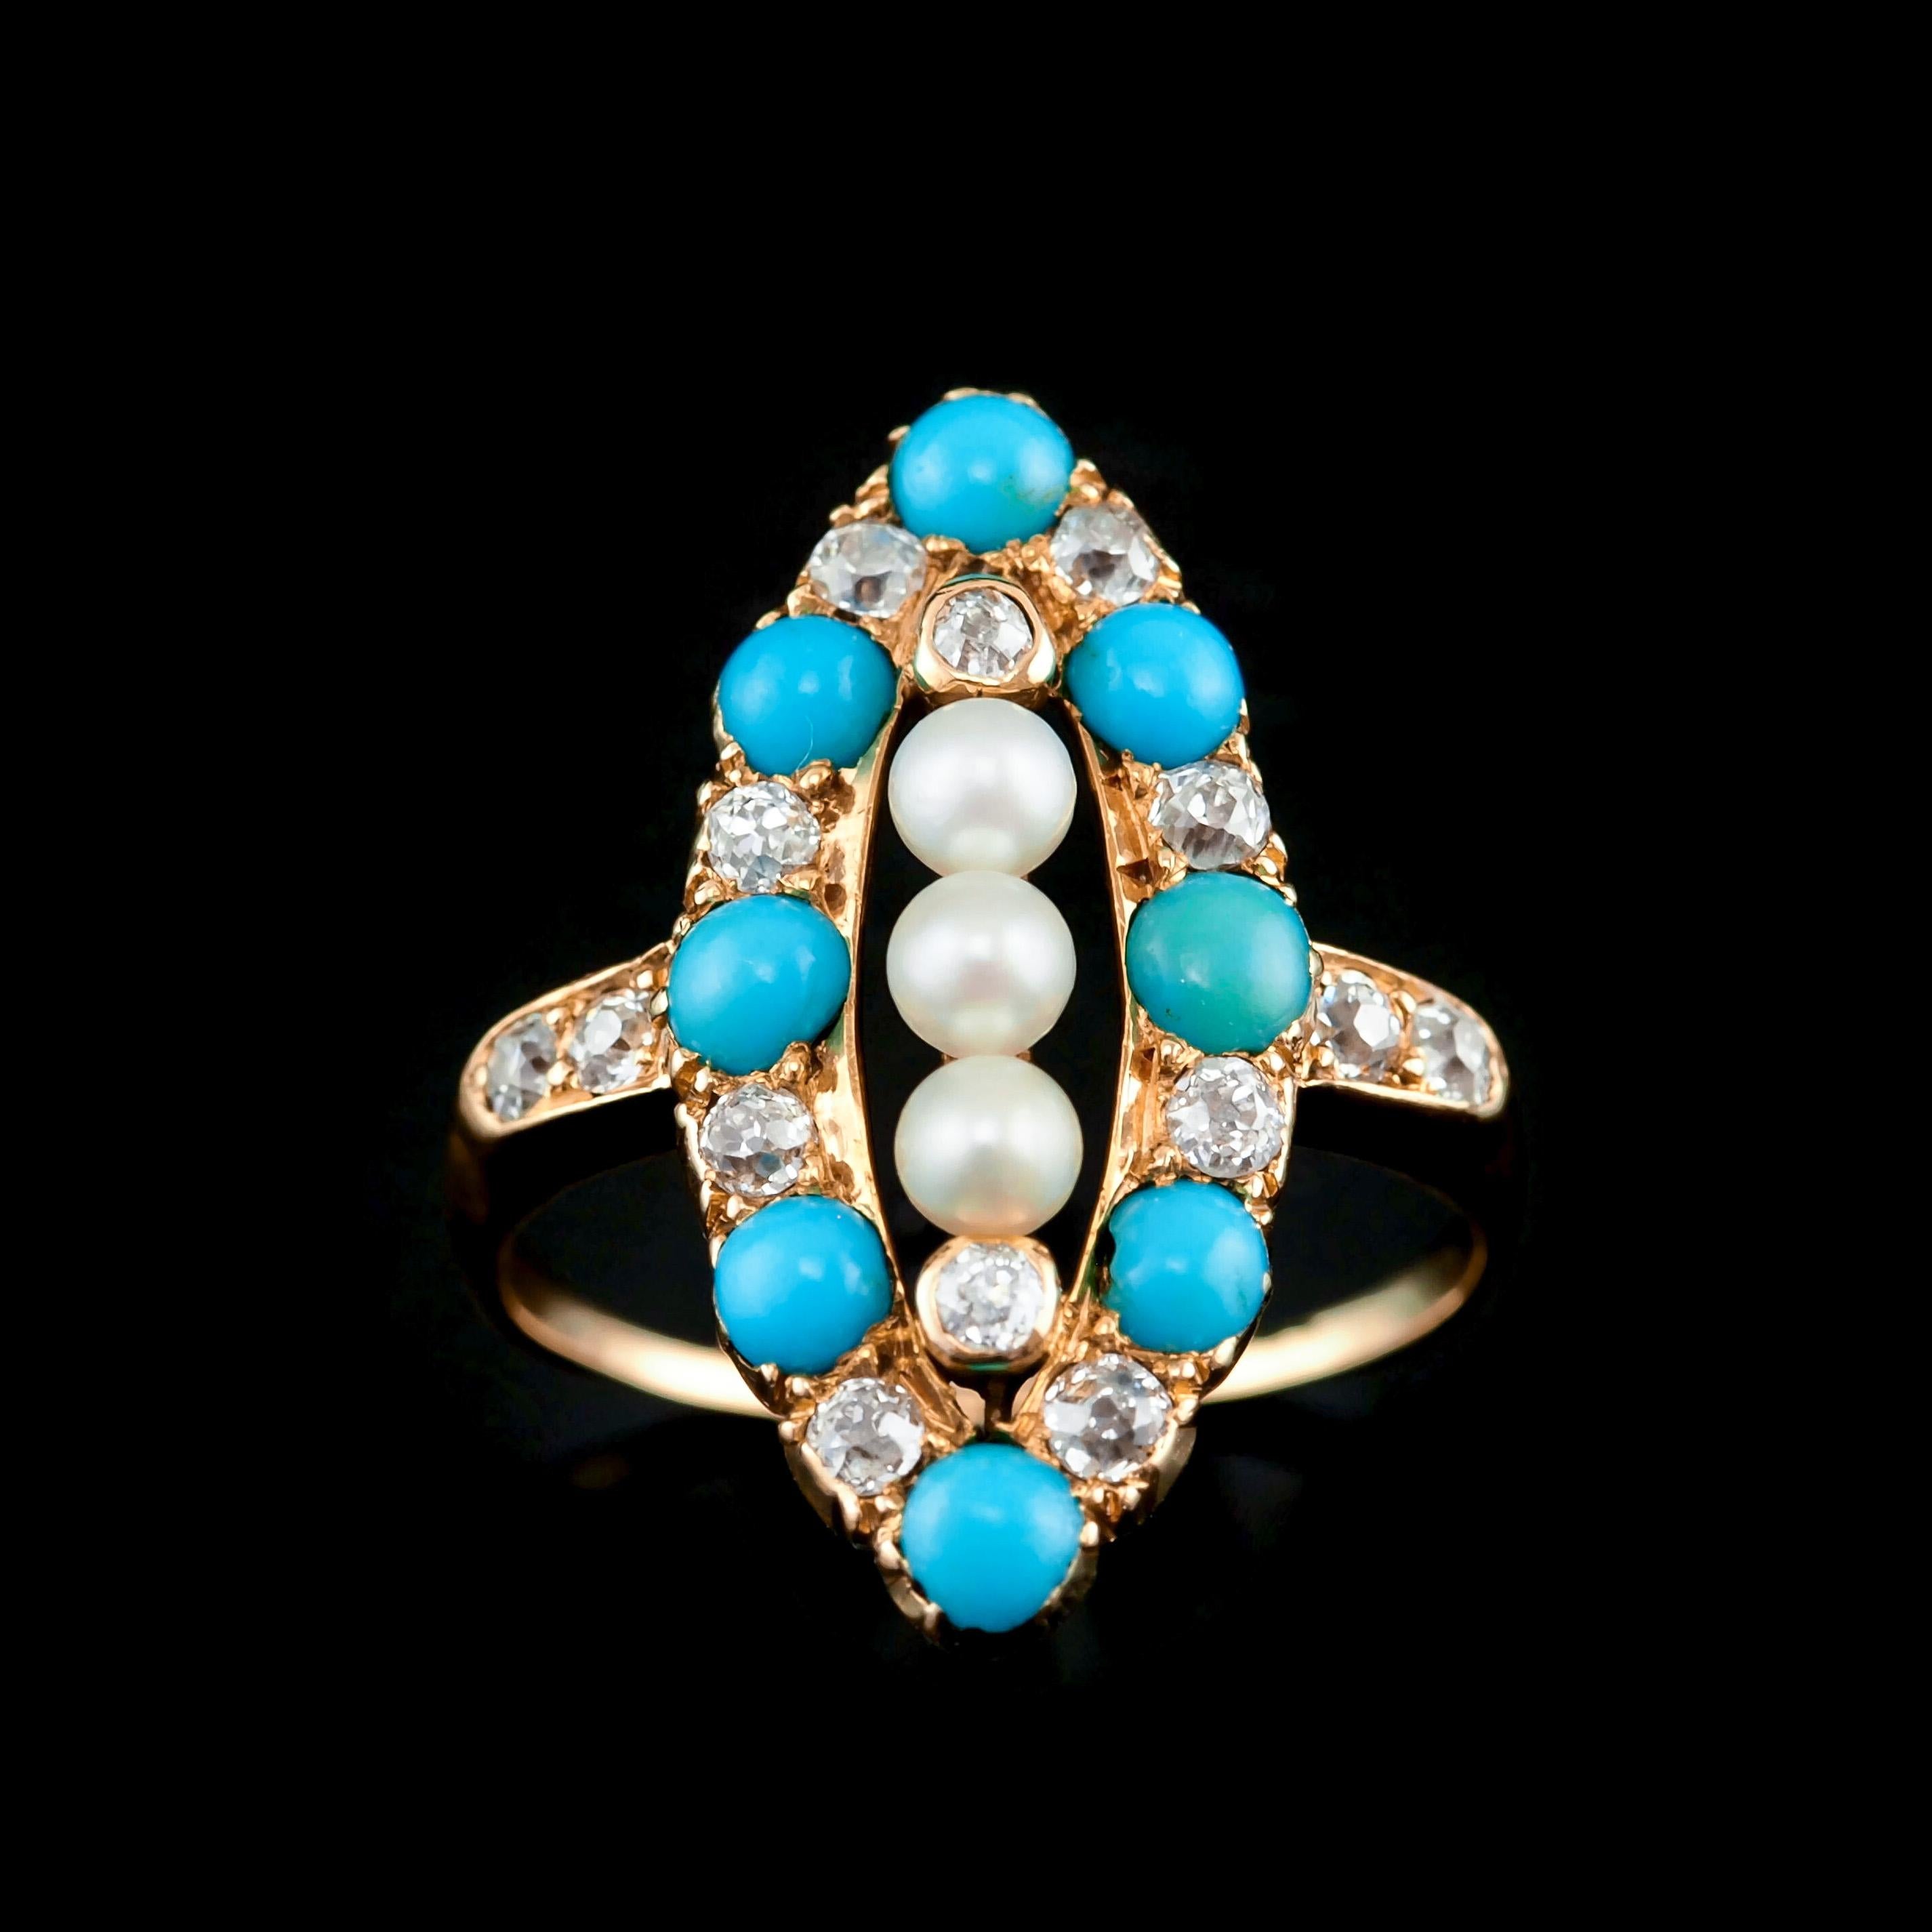 Antique Victorian Diamond Pearl Turquoise 18K Gold Ring Navette/Marquise c.1880 For Sale 2